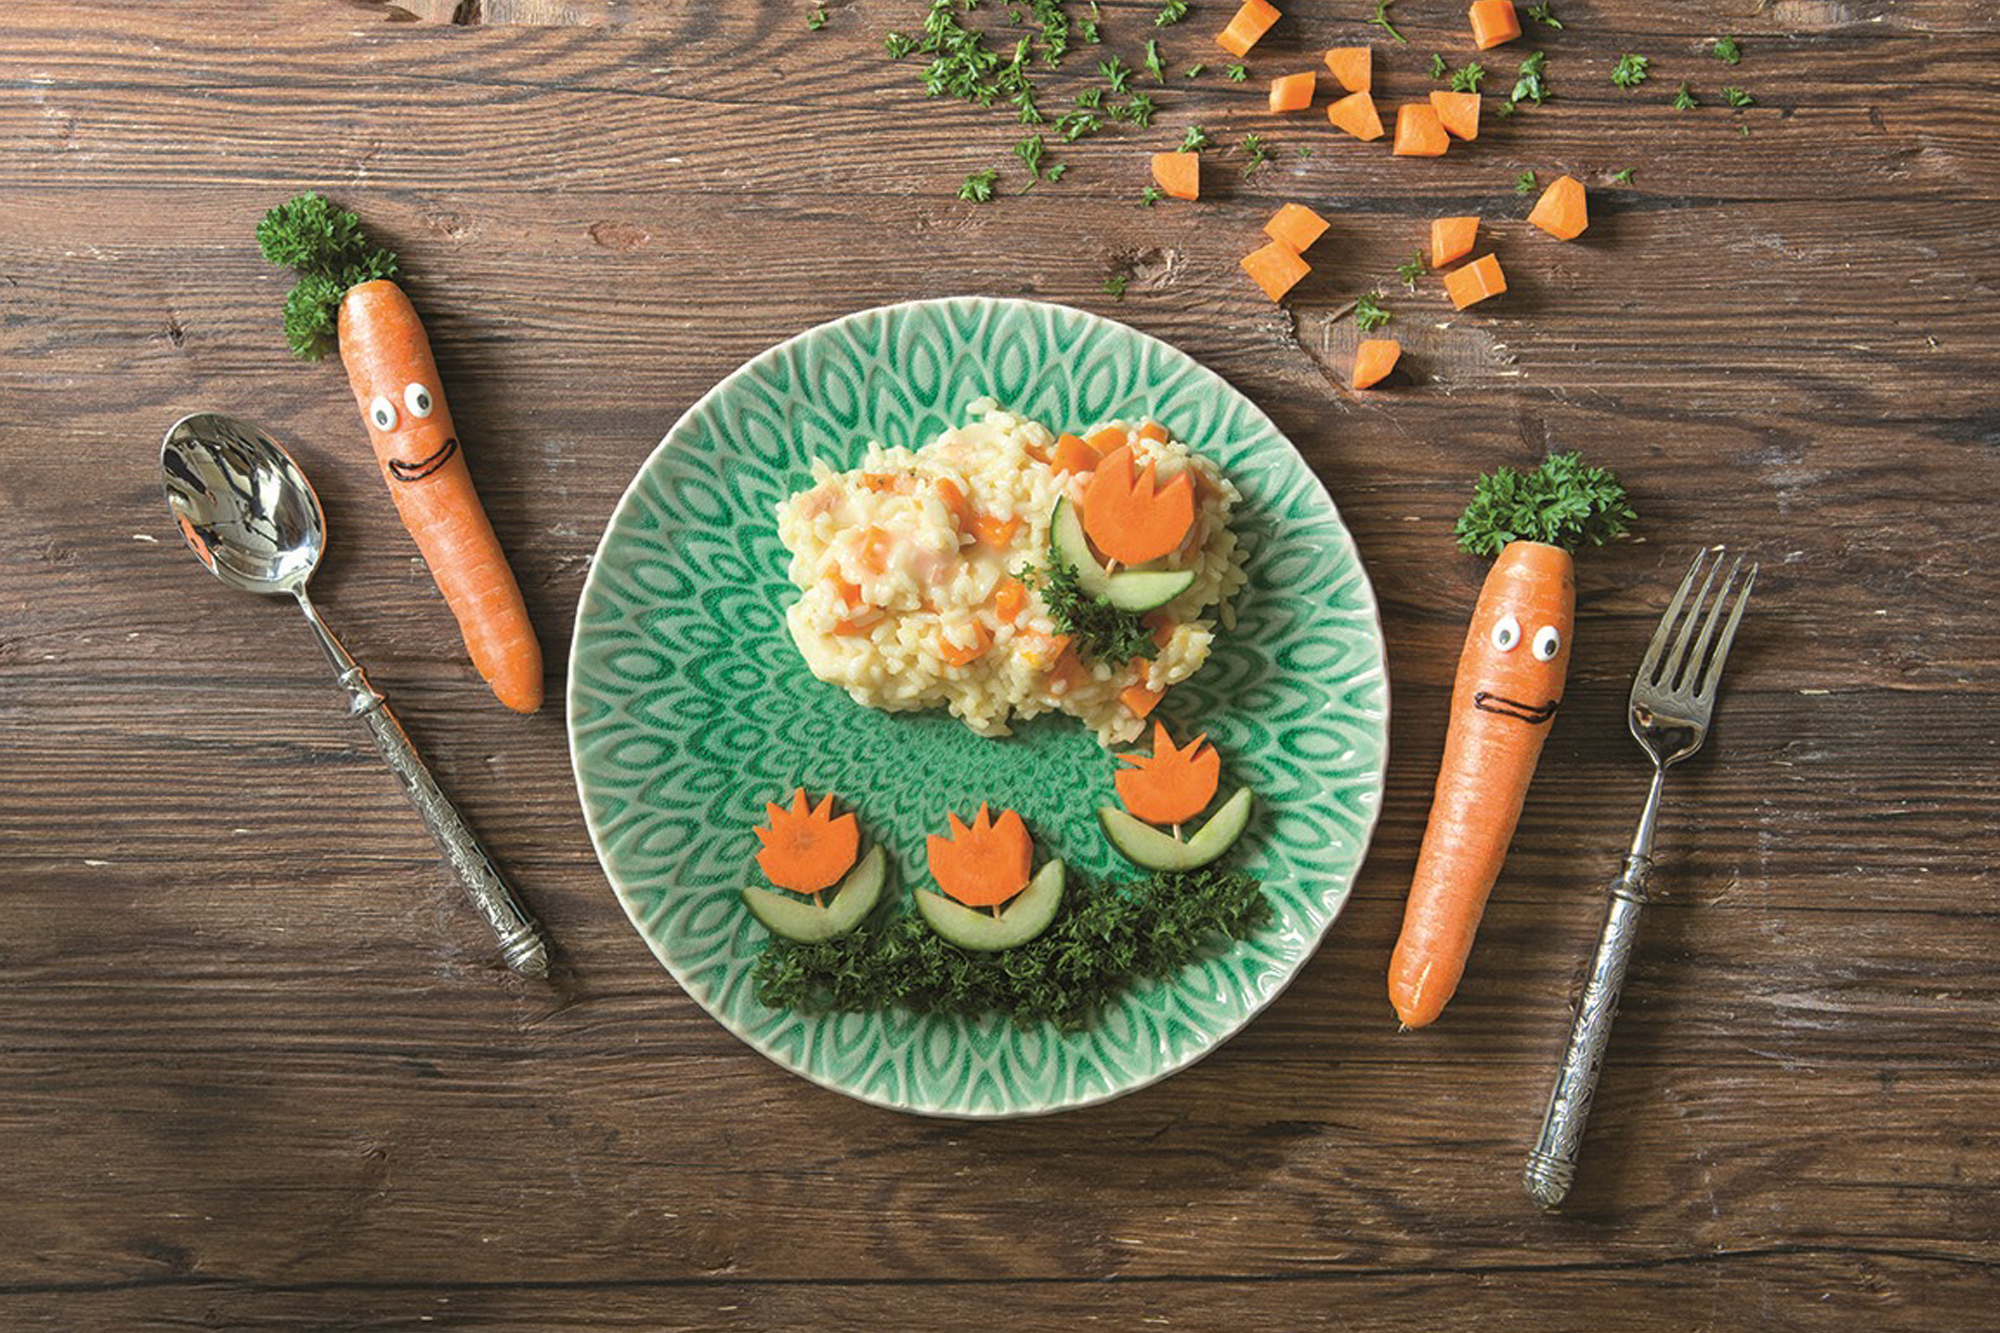 Carrot risotto